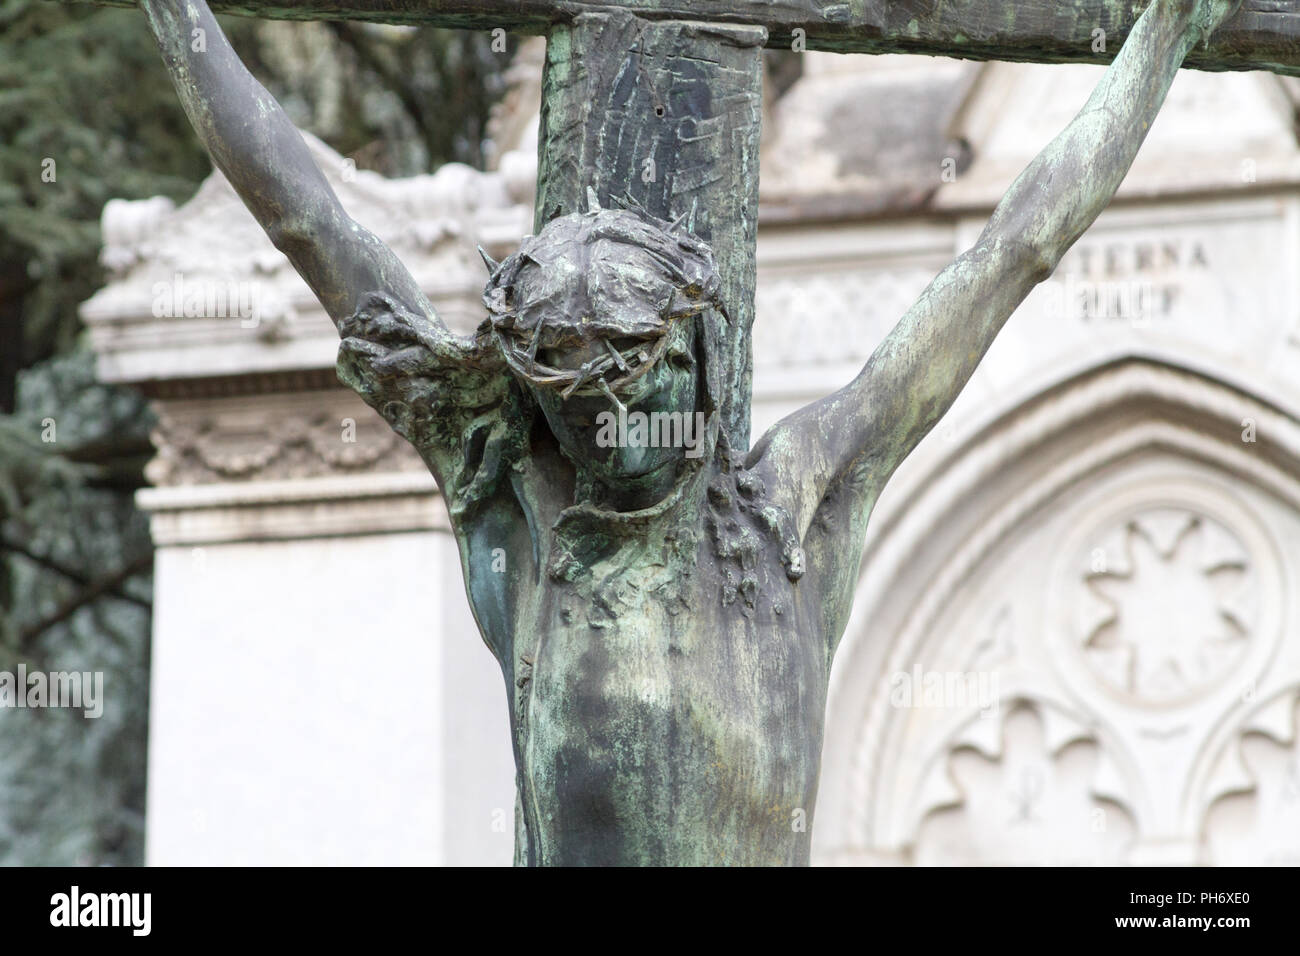 Milano, Italy. 2018/2/8. A statue of Jesus Christ on the cross at the Cimitero Monumentale ('Monumental Cemetery') in Milan, Italy. Stock Photo